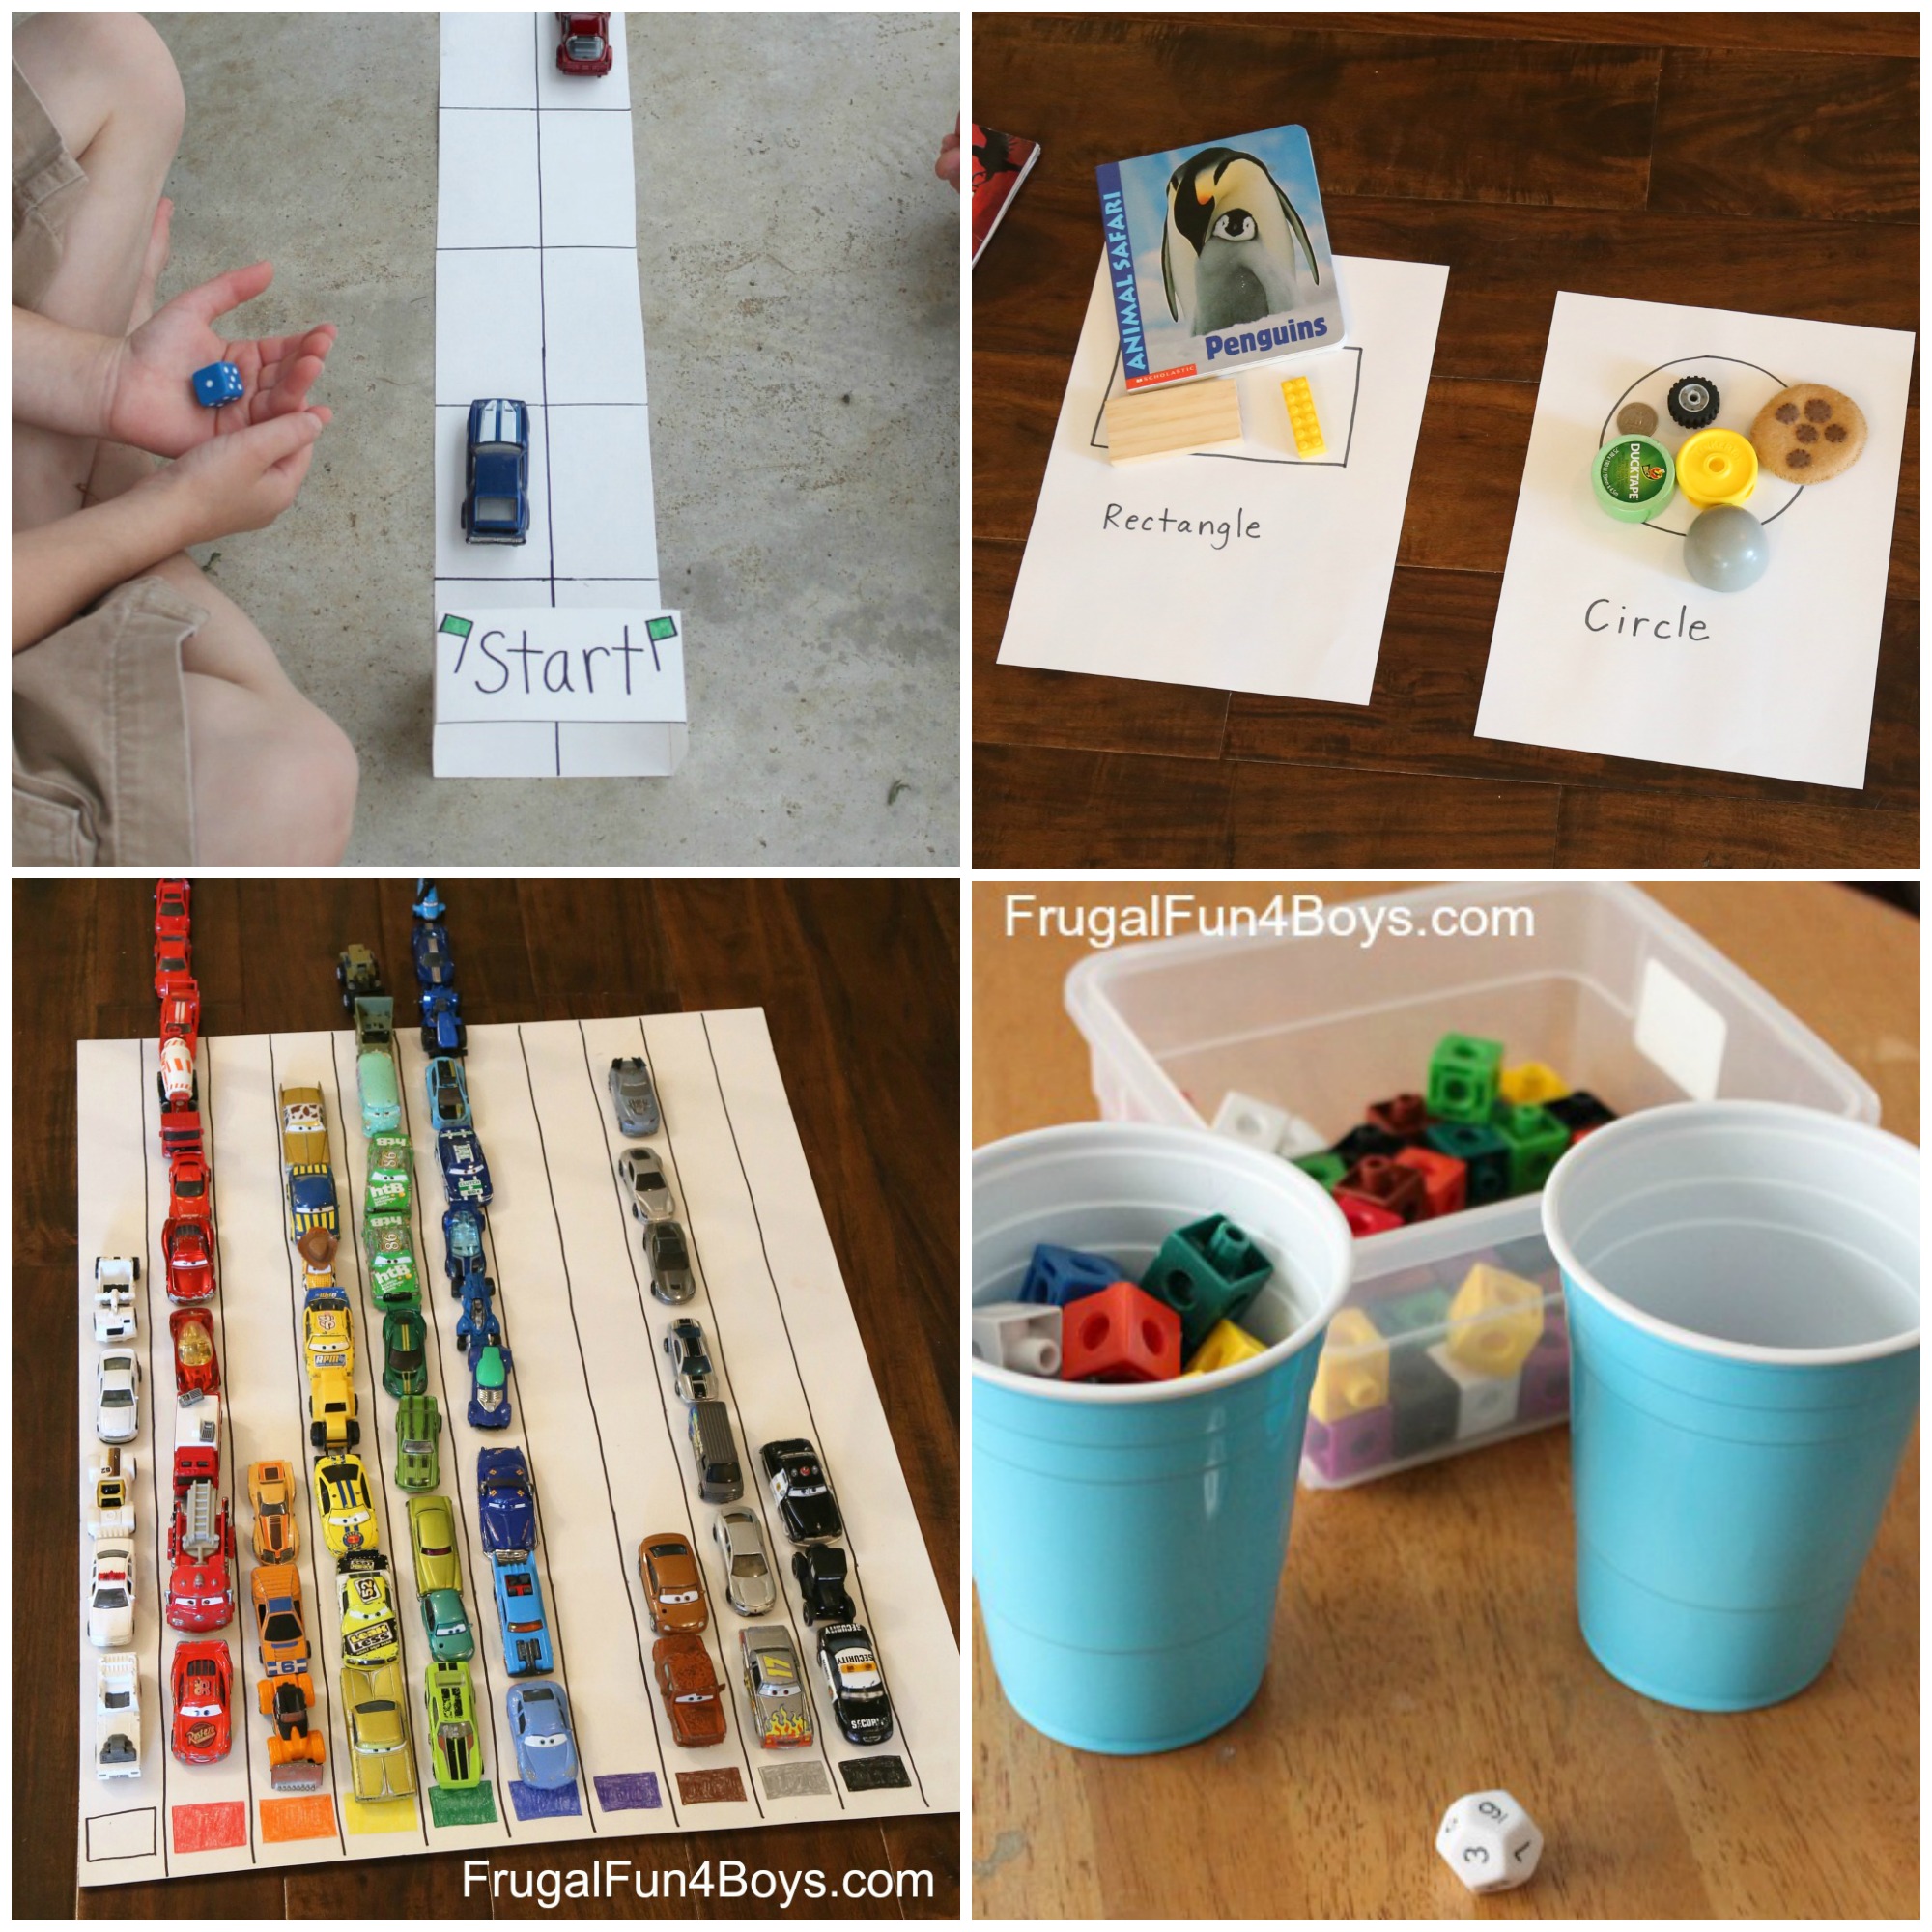 40+ of the BEST Math and Literacy Activities for Preschoolers 3 & 4 year olds